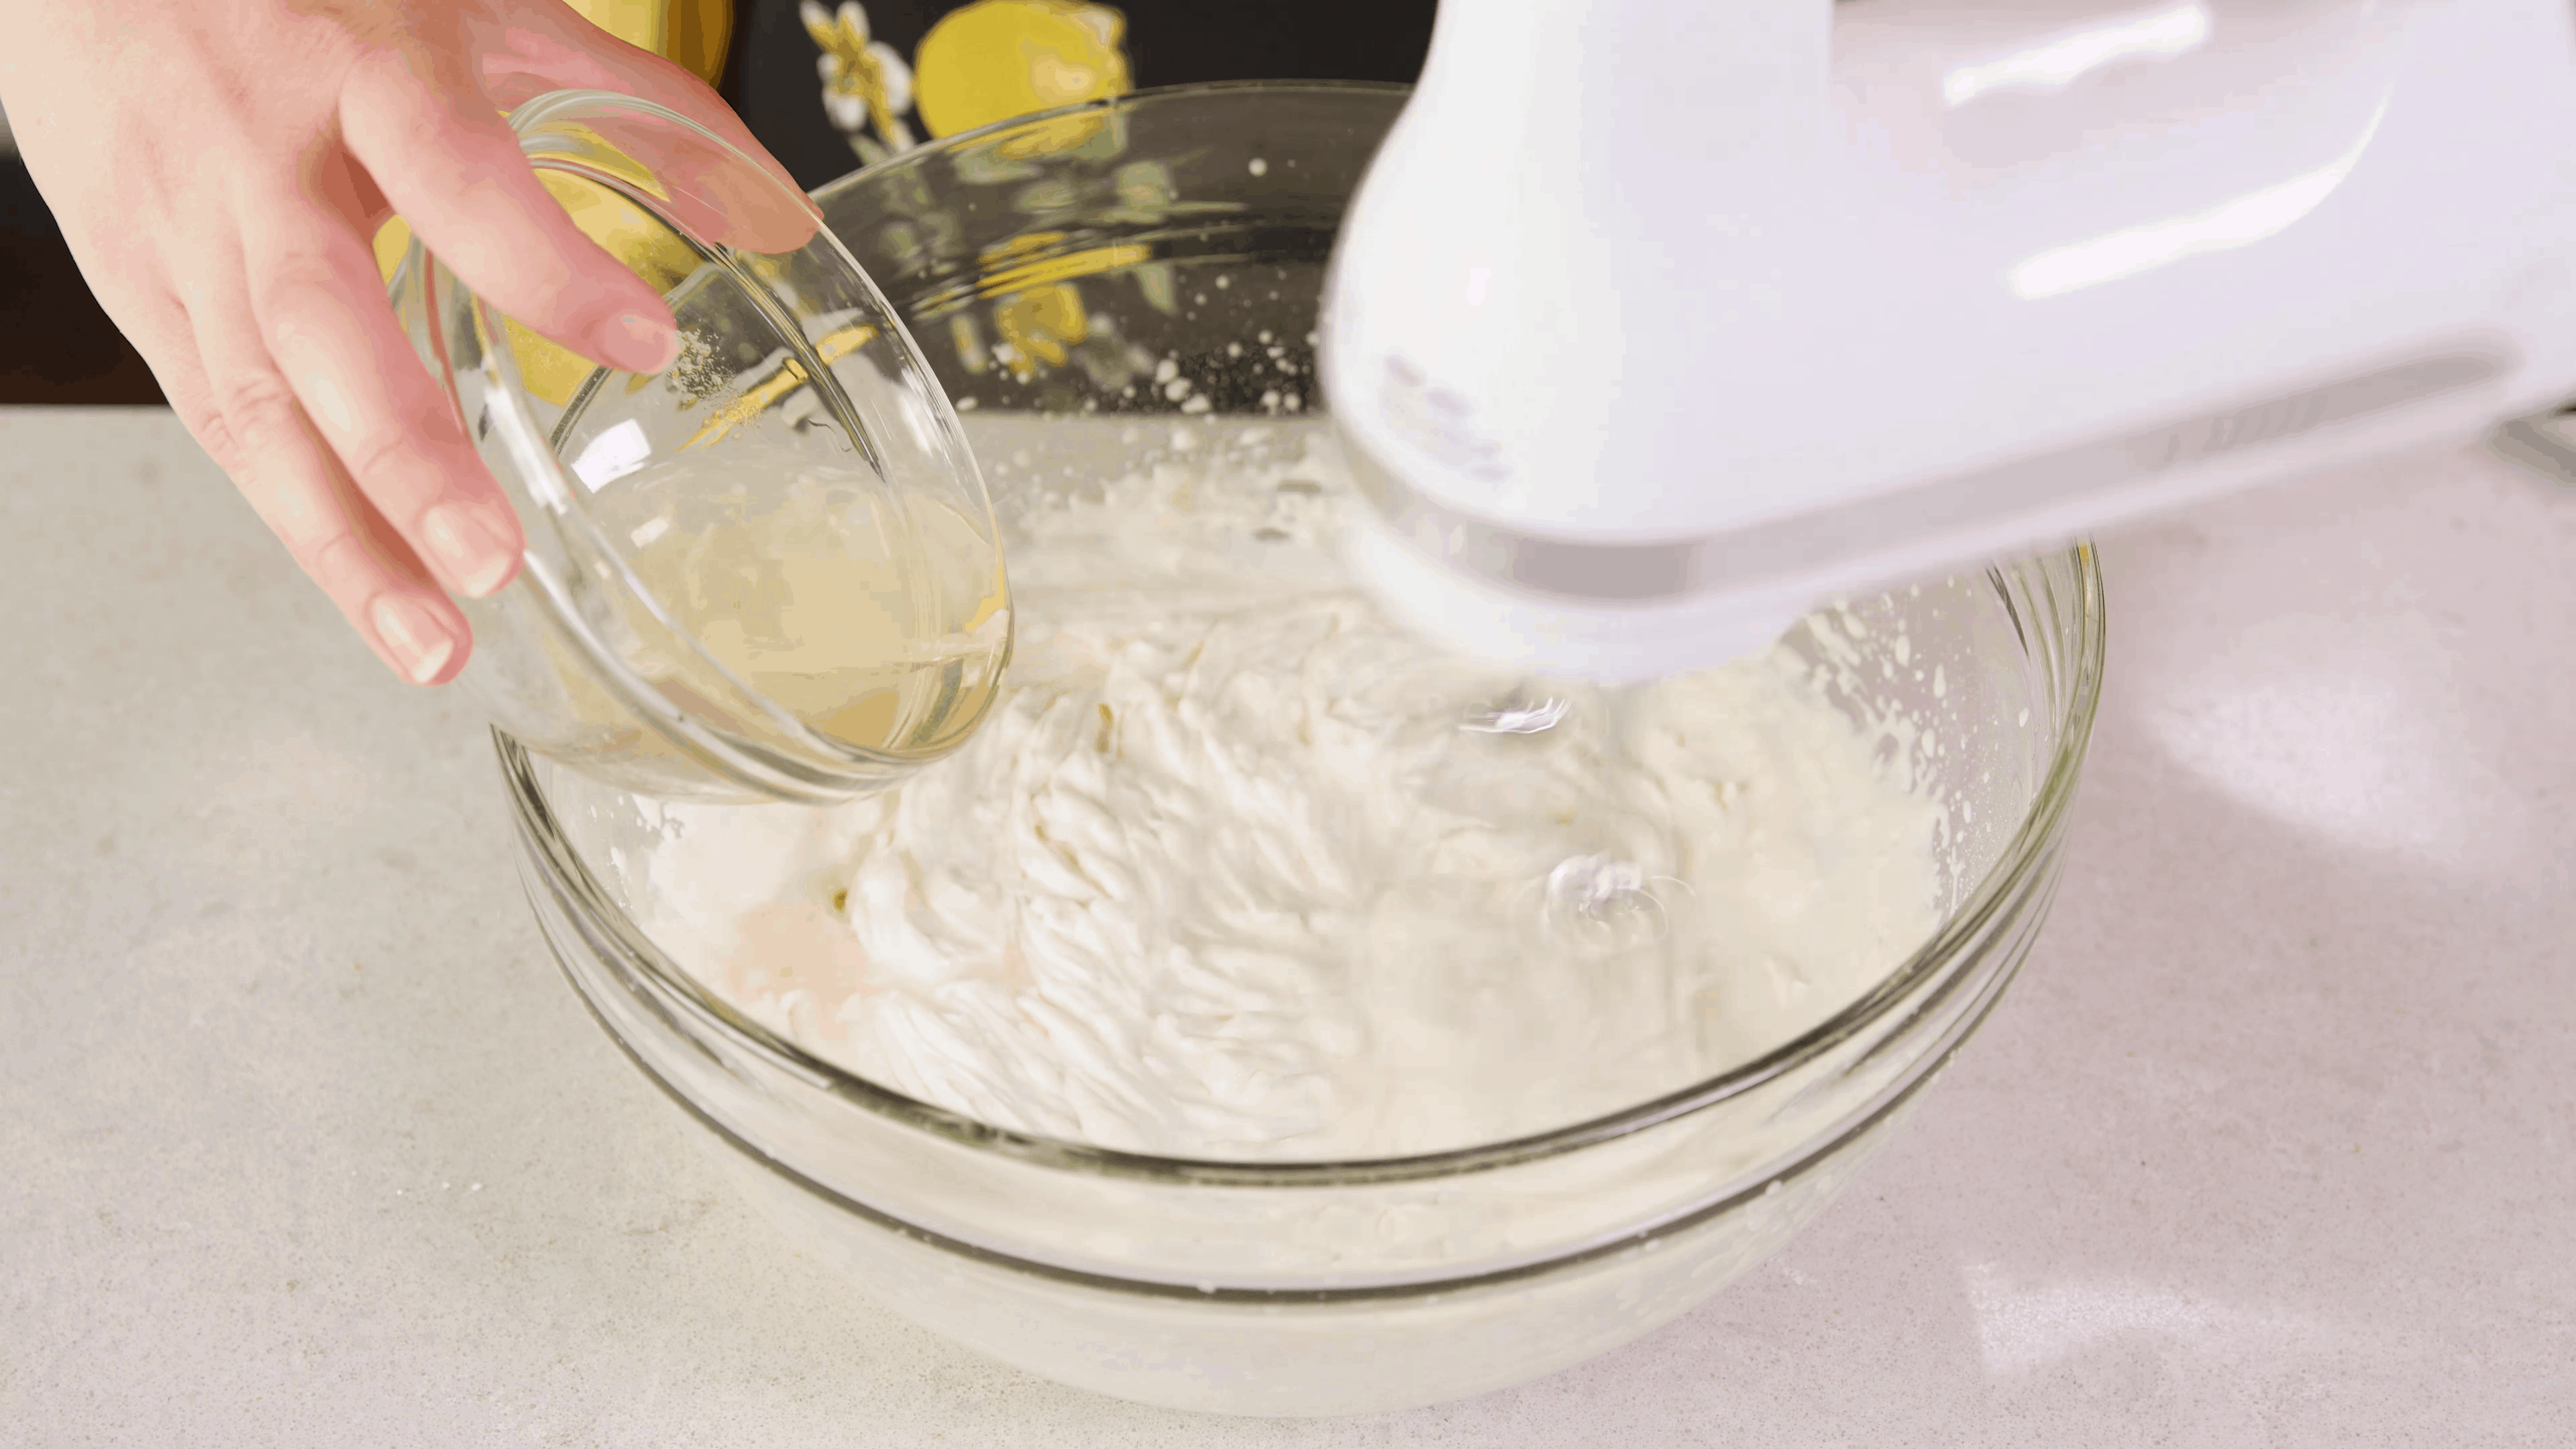 A large mixing bowl with hand mixer whipping cream and a small dish with gelatin being poured from the side to stabilize the whipped cream.